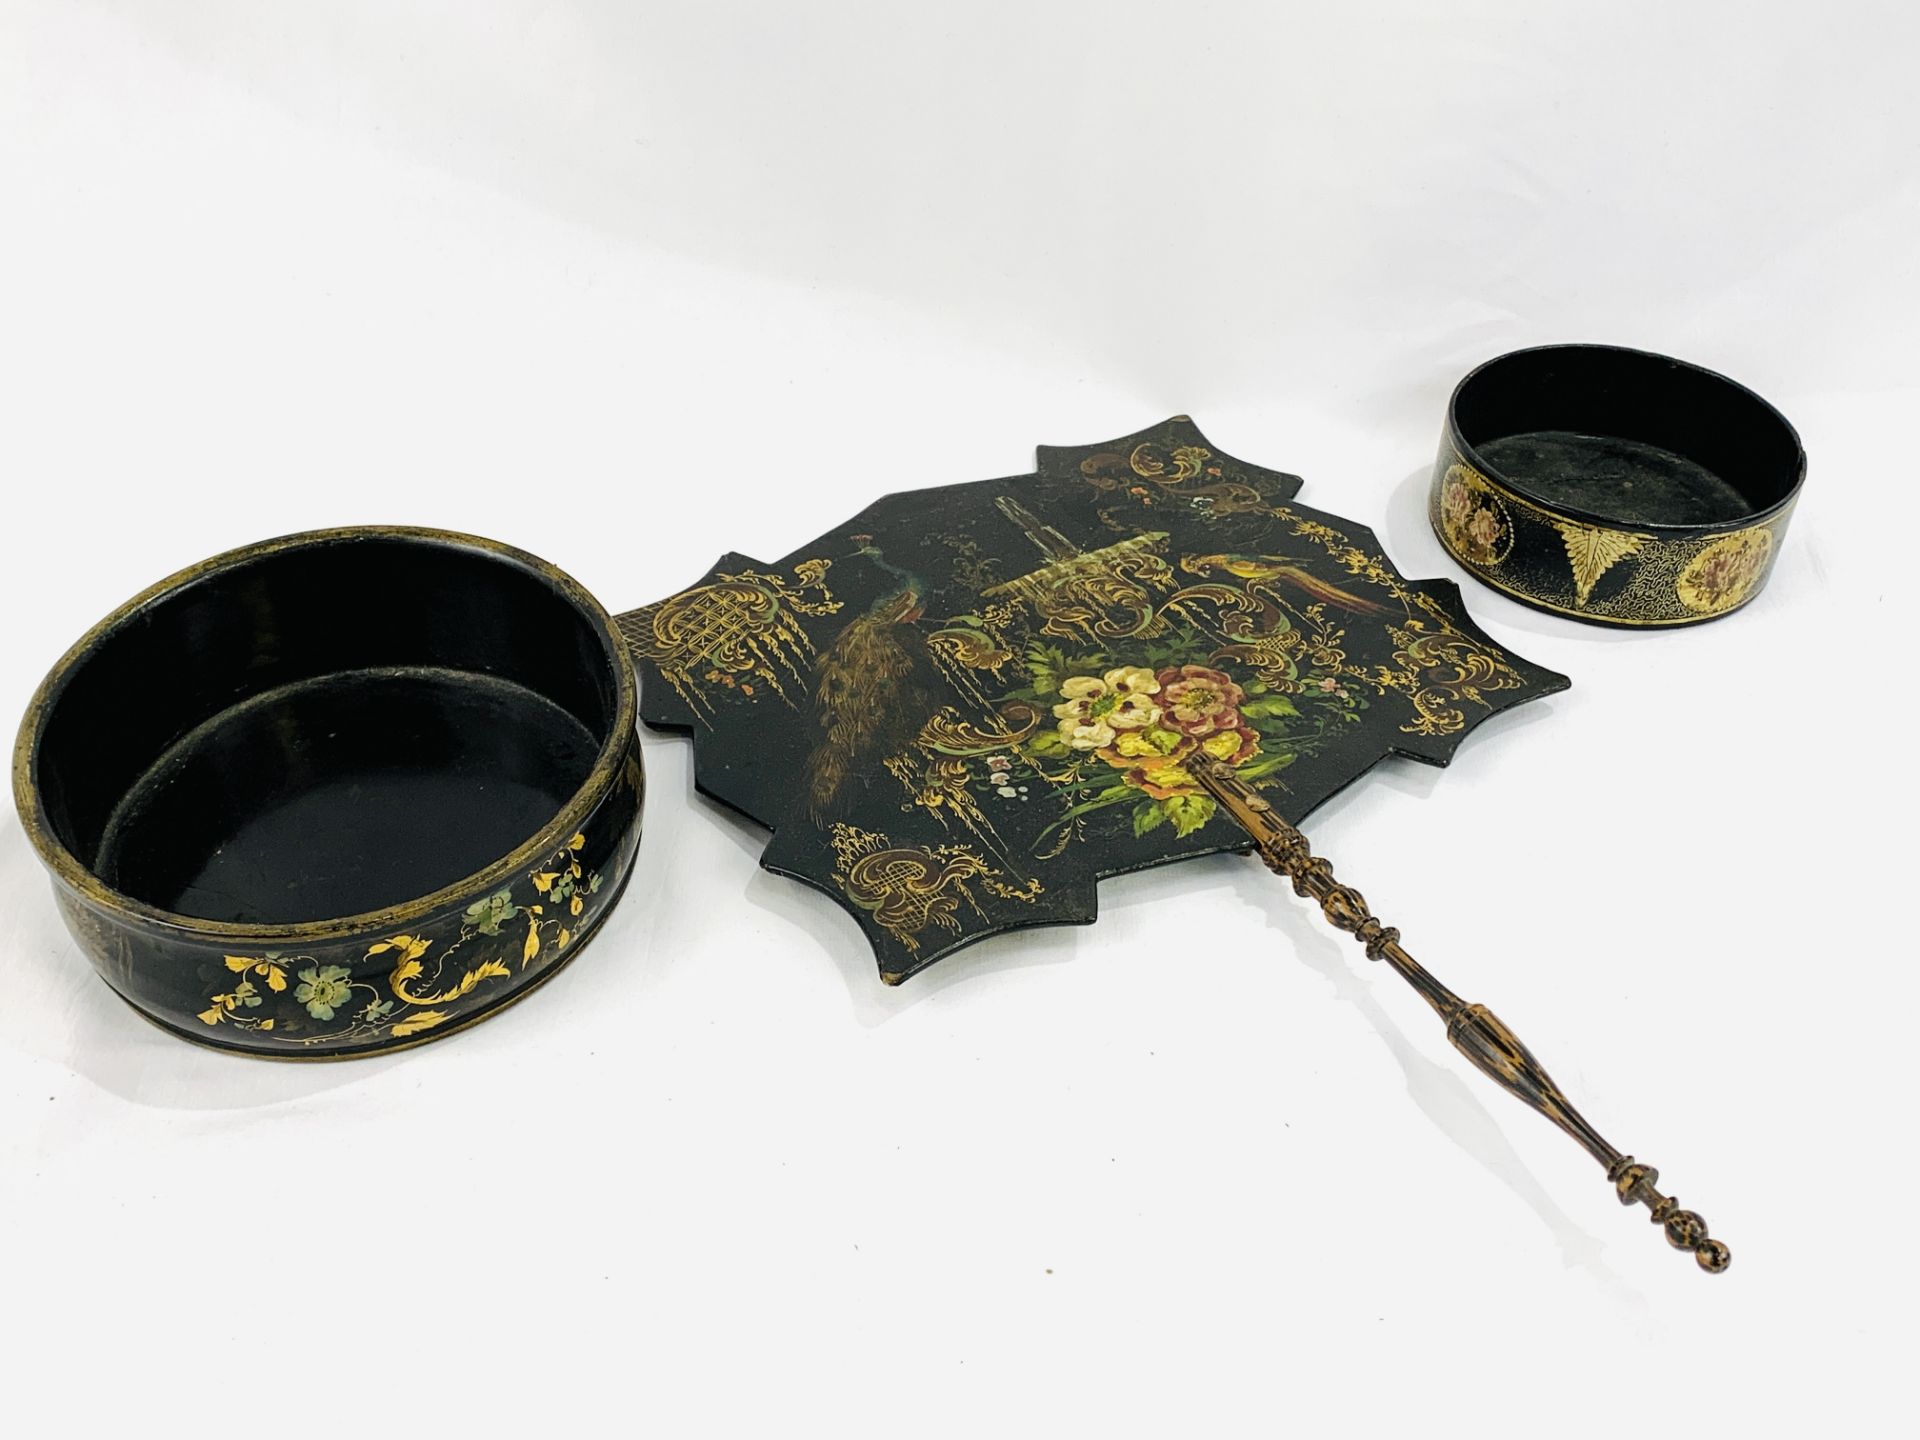 Black shaped wooden fan together with two papier mache bowls